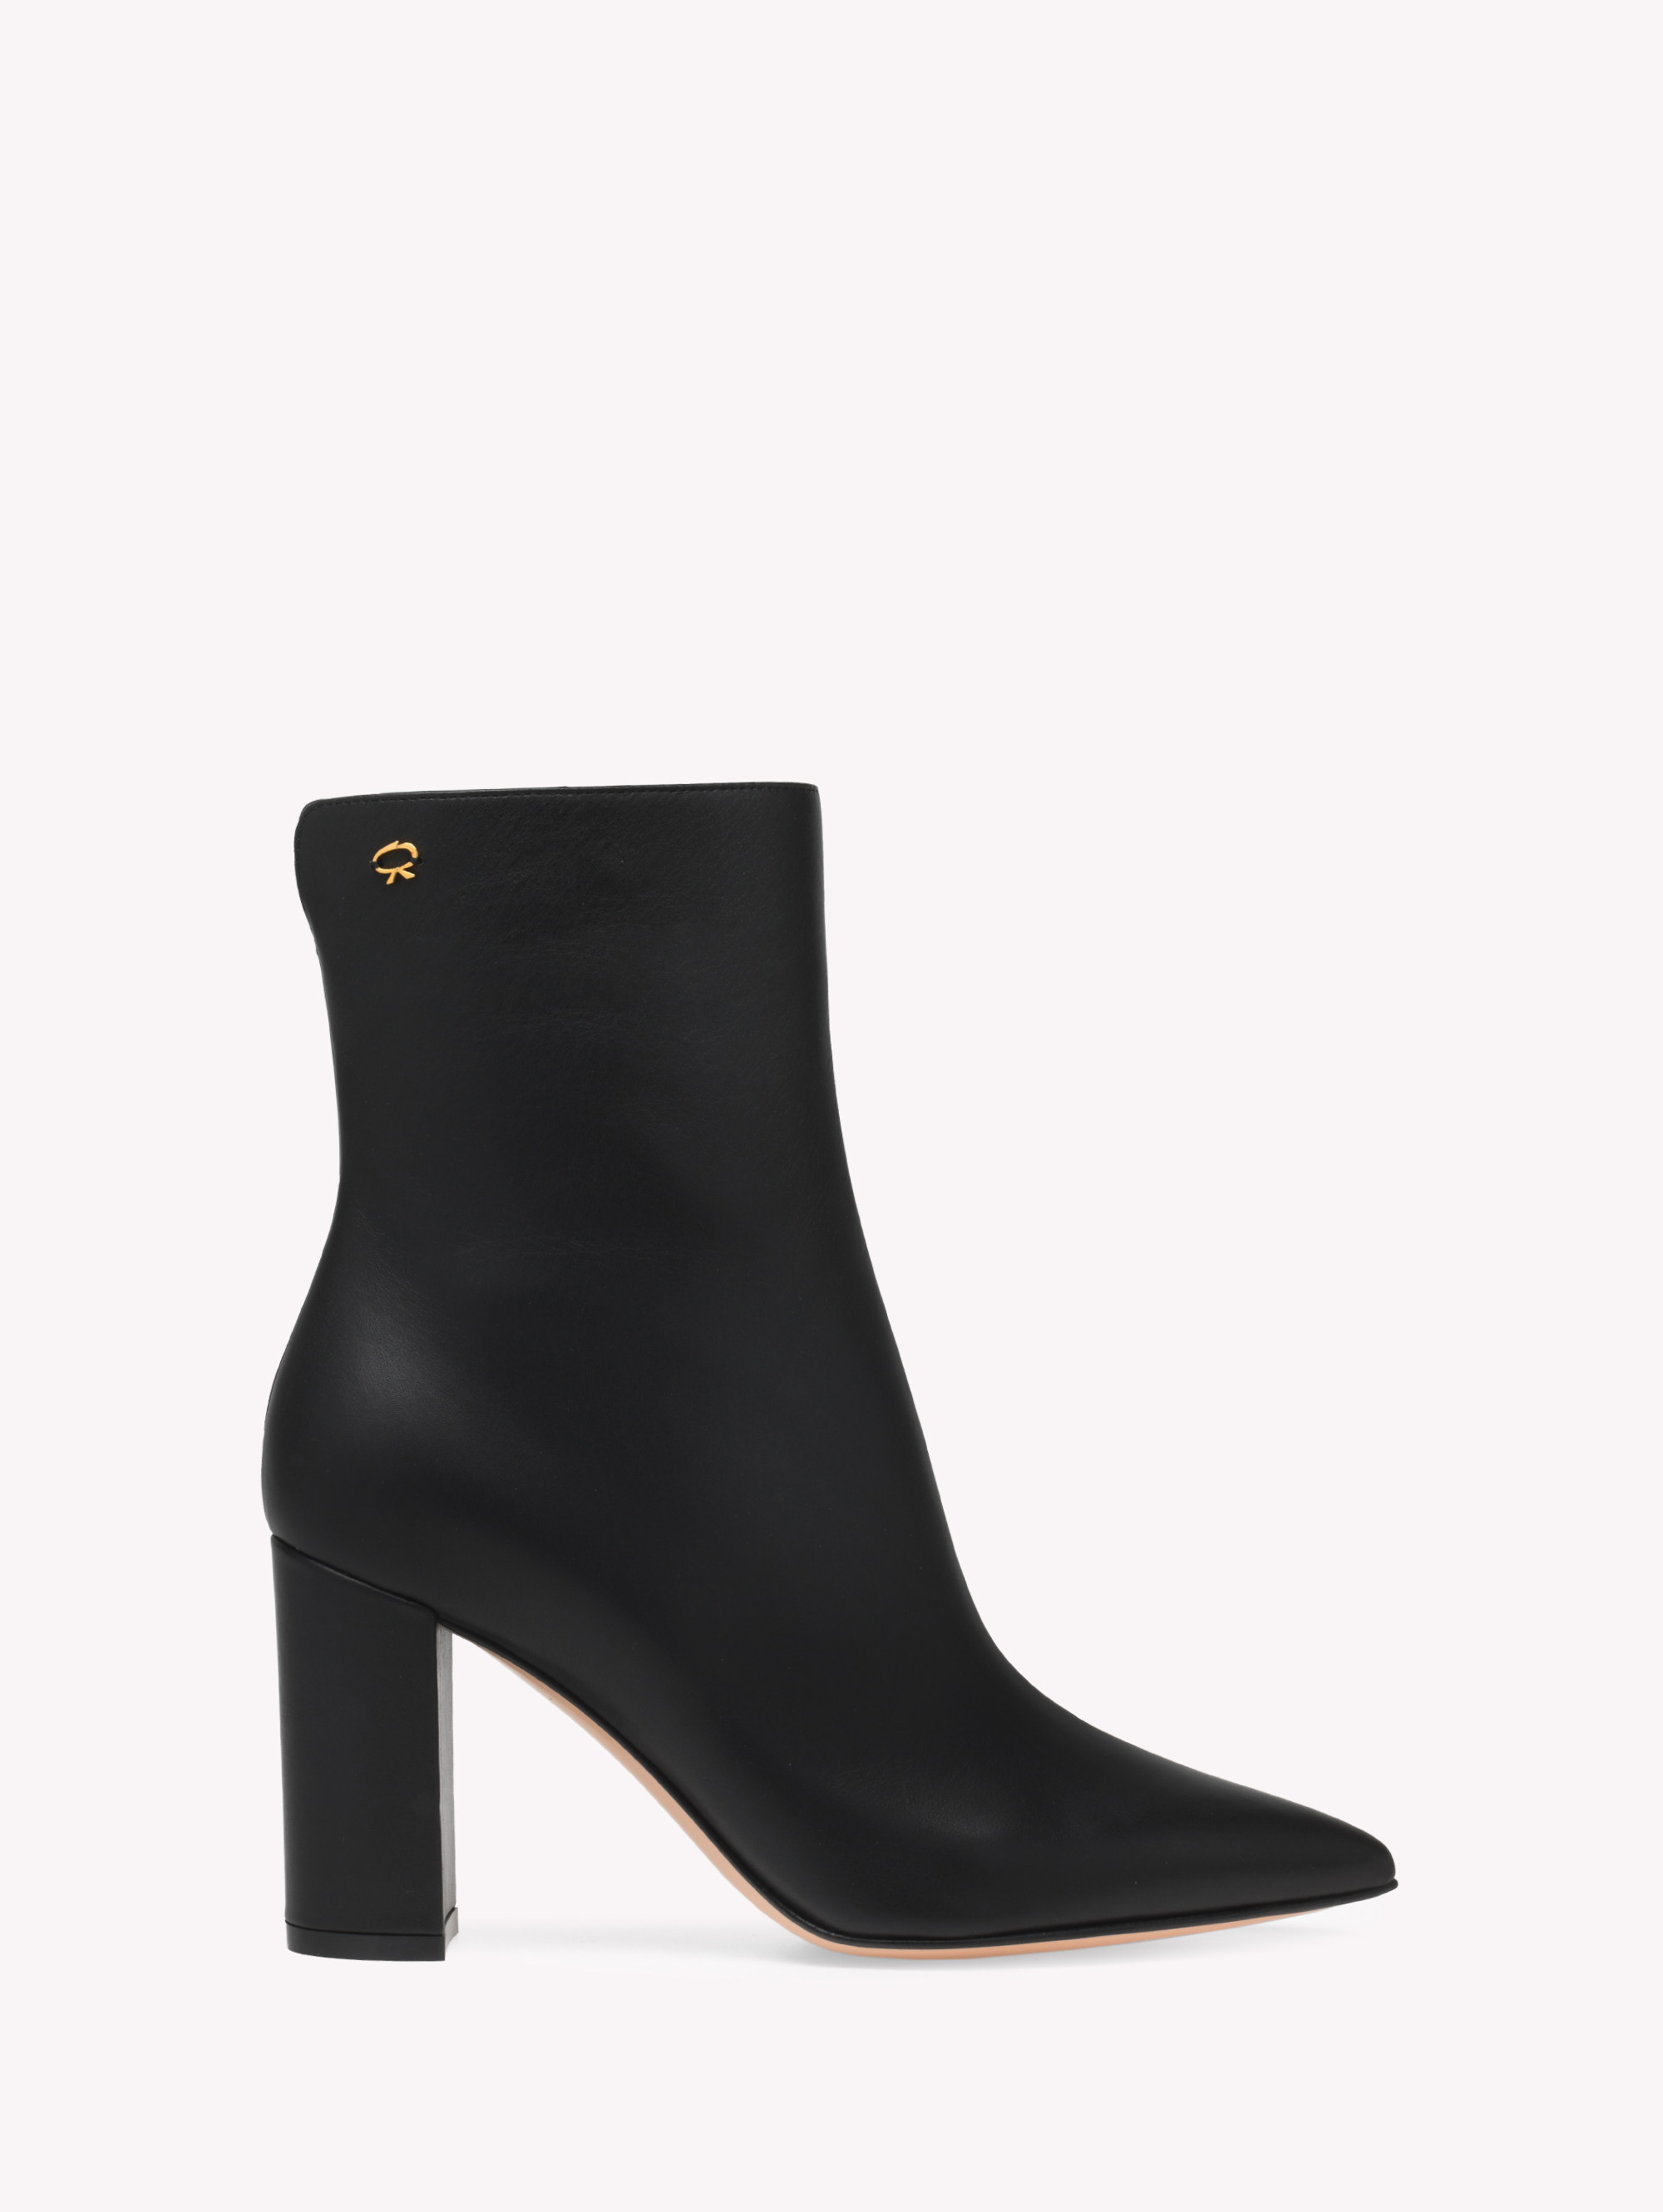 Ankle Boots for Women LYELL | Gianvito Rossi